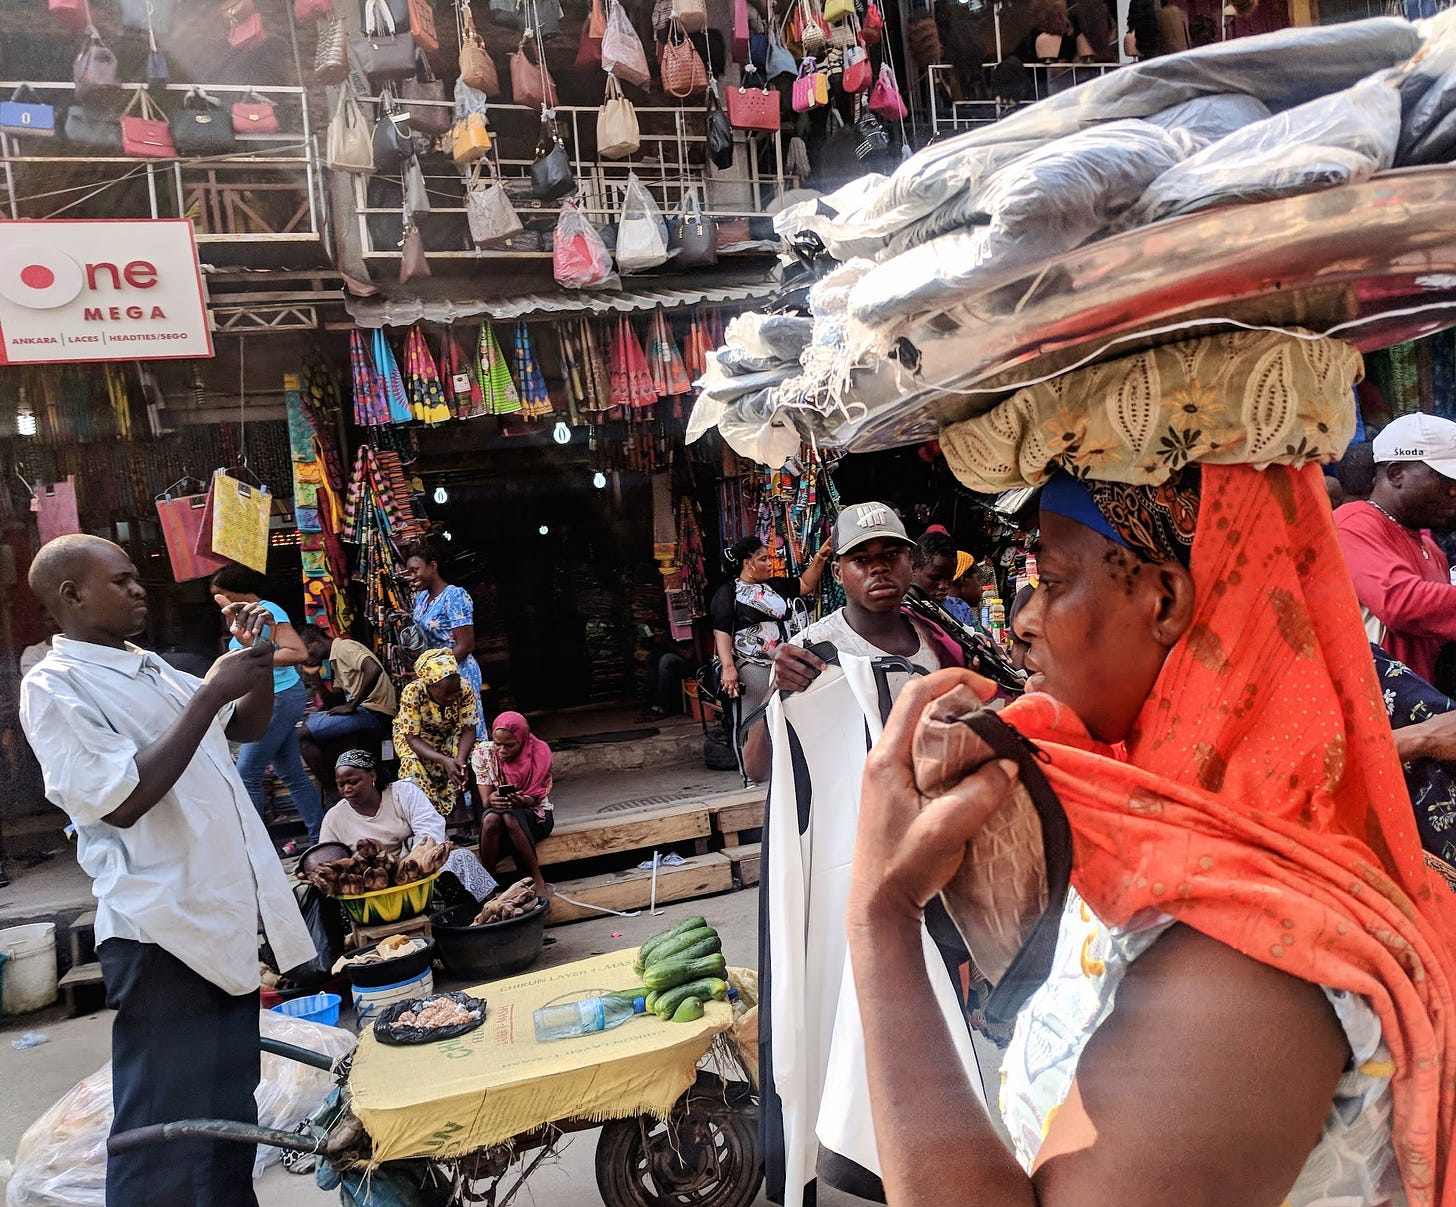 A man shields his phone to read it in the sun, and a woman with a bright scarf walks by with packages on her head. They are surrounded by a busy, colorful market, with people sitting on a stoop and hanging purses and cloths for sale.